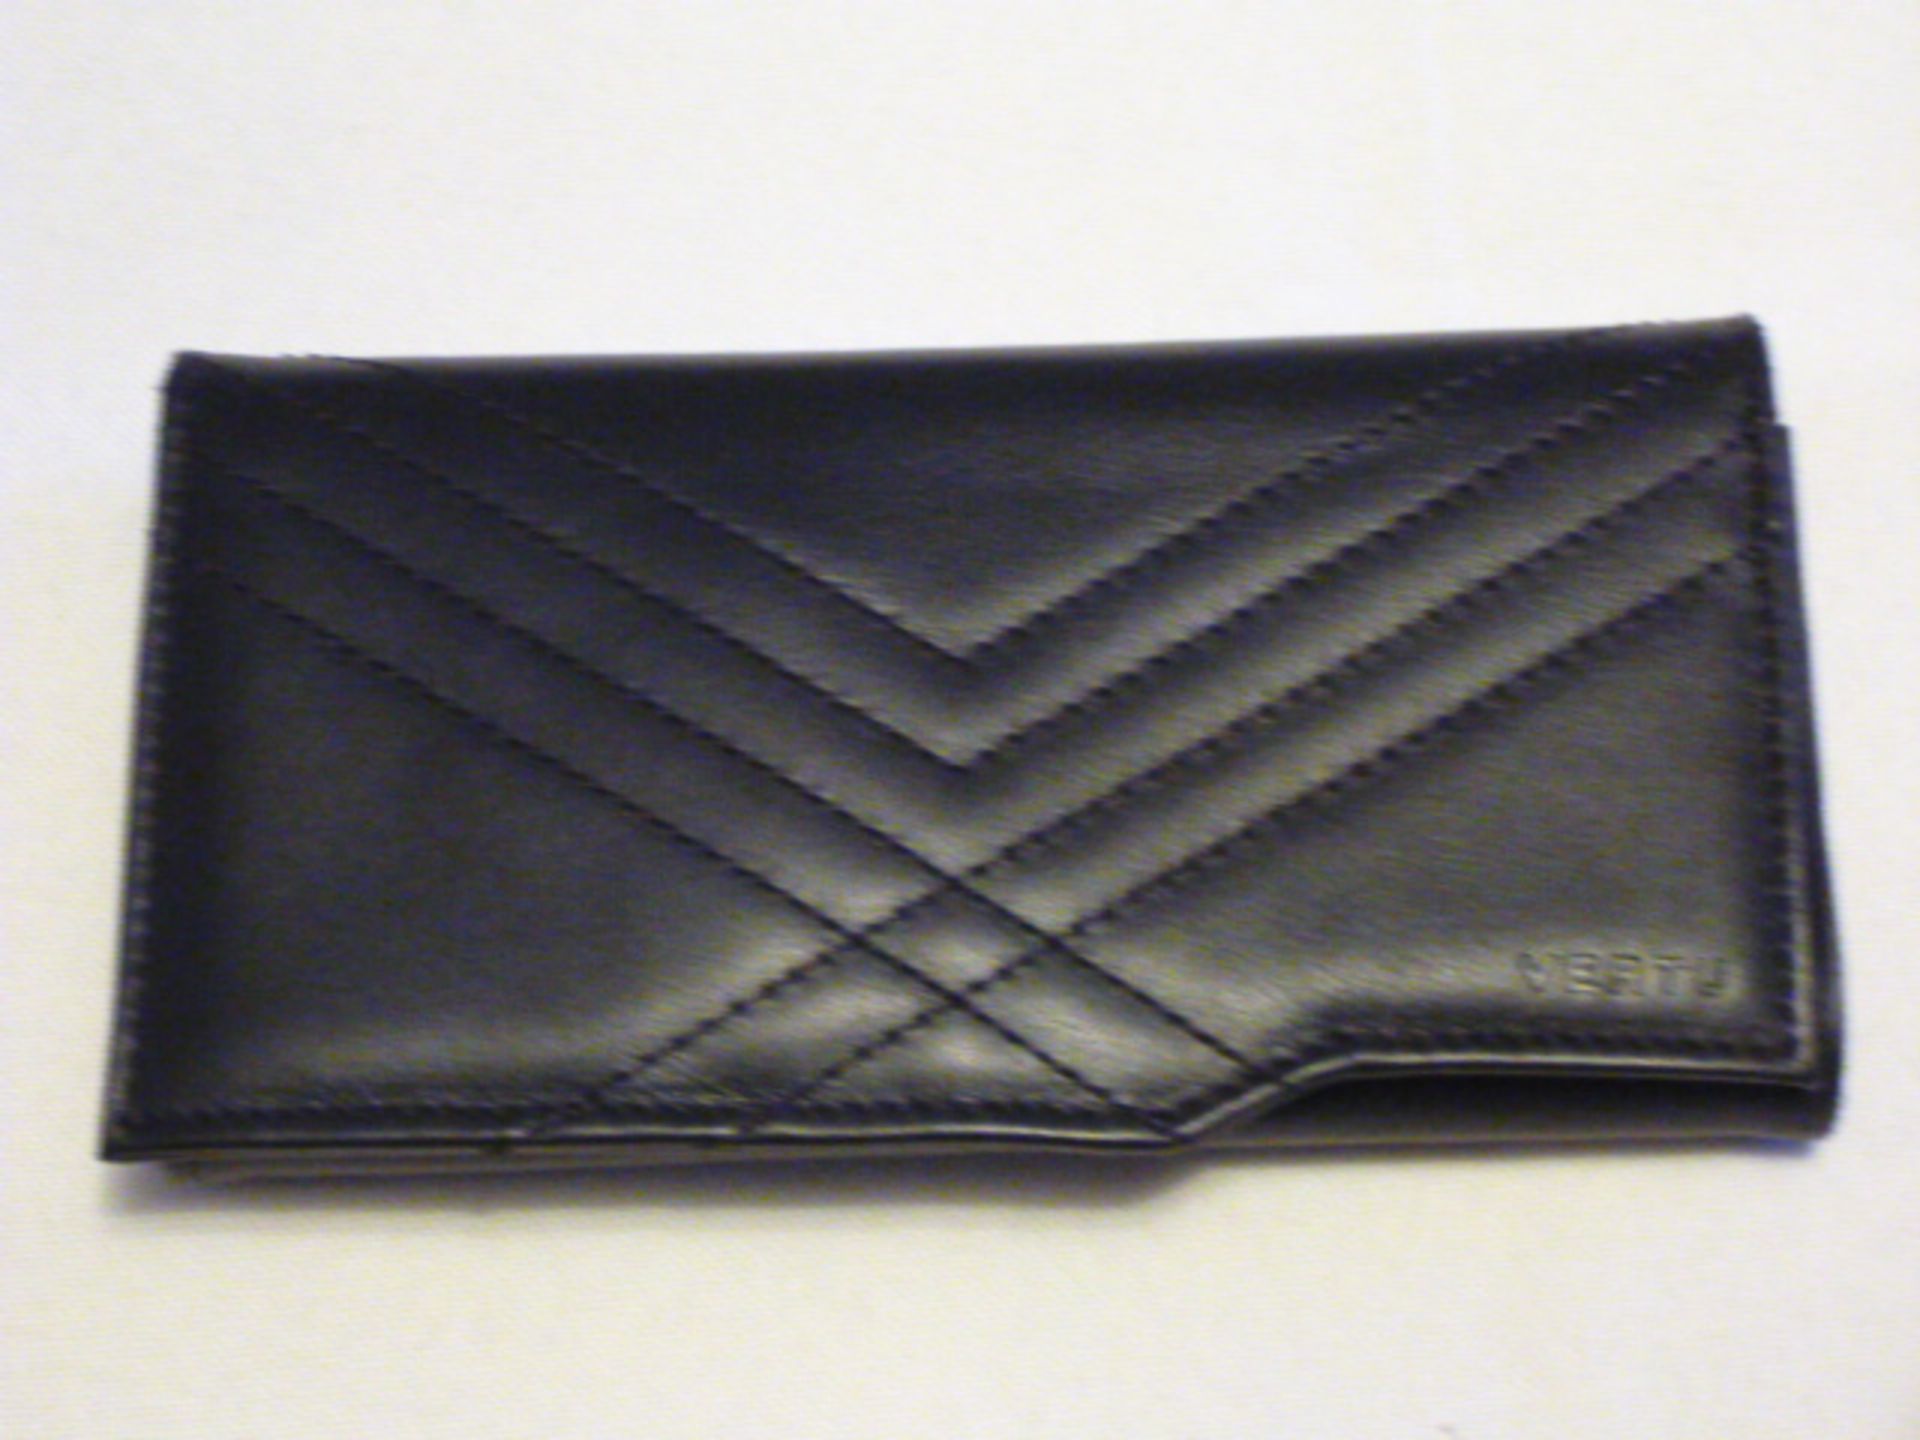 Vertu Aster Black Quilt Leather Purse Style Pouch. RRP £700. New/Boxed